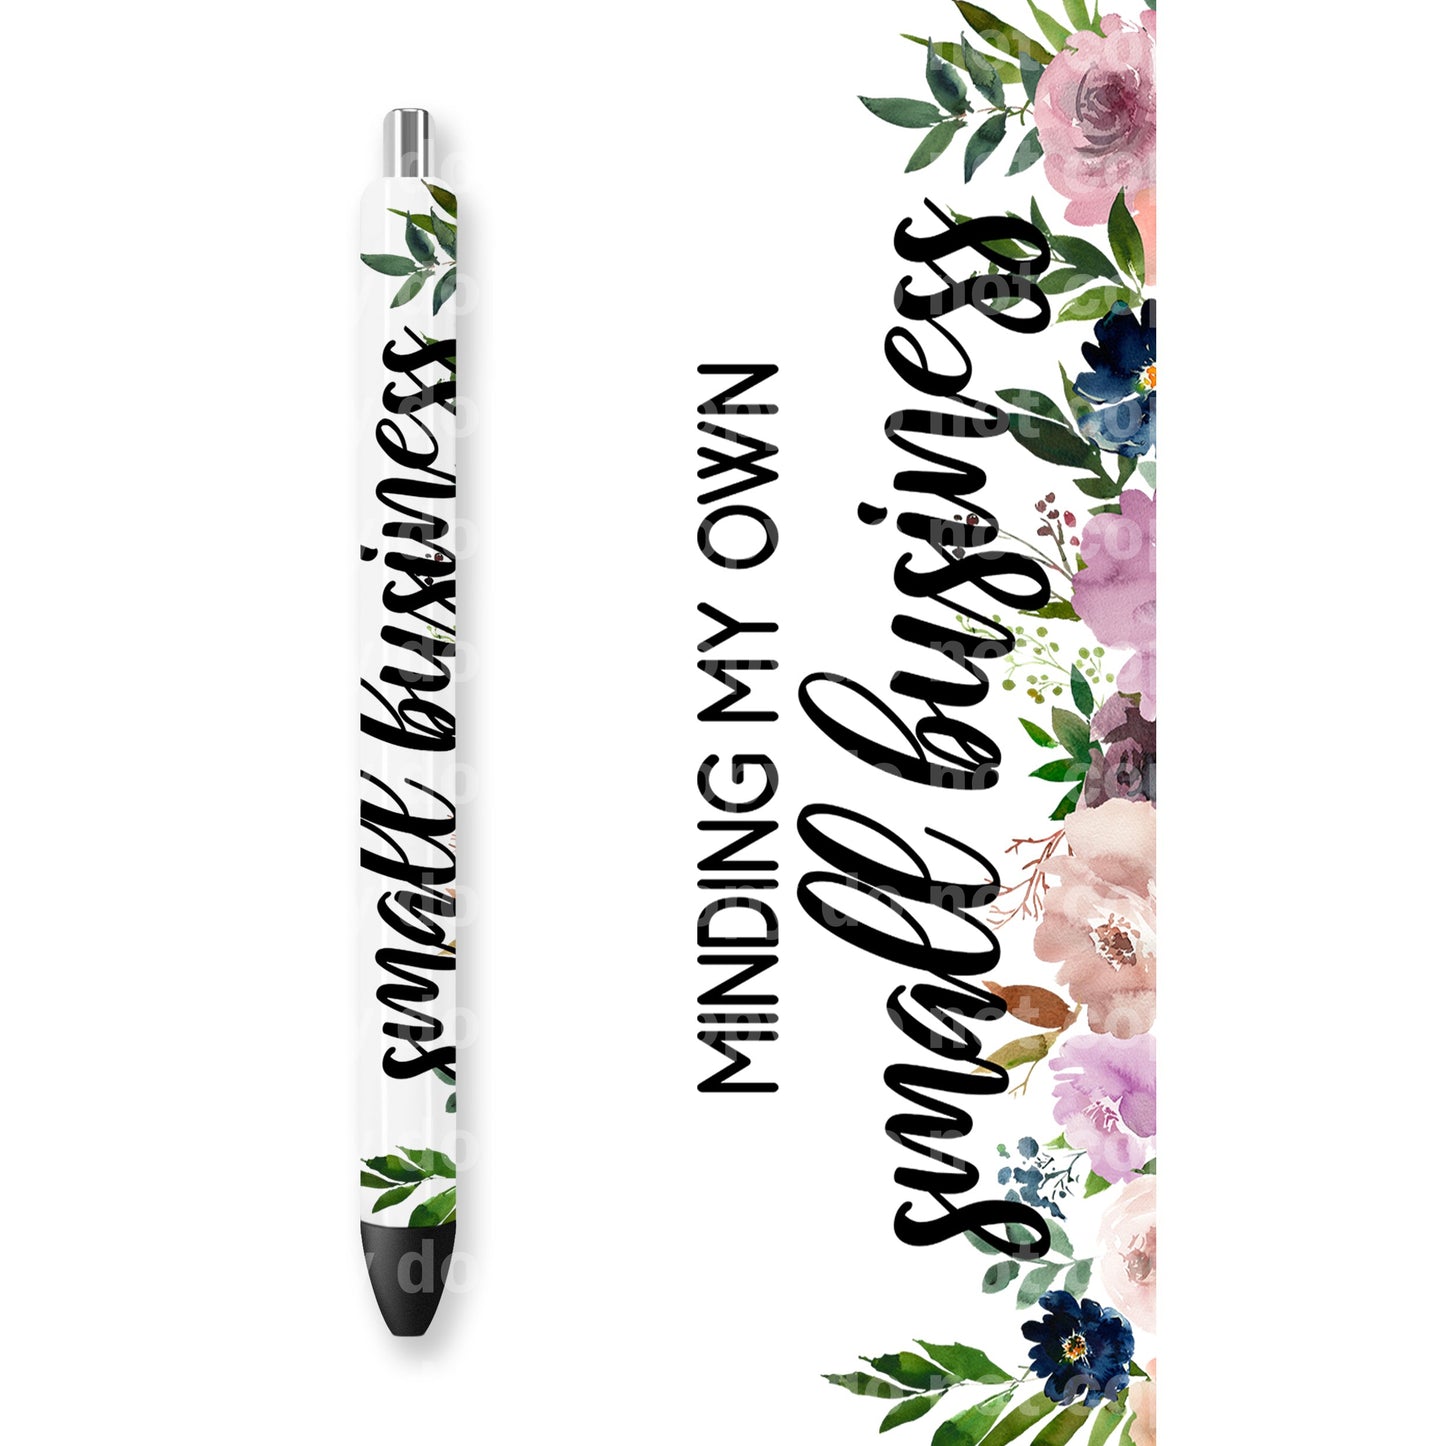 Minding My Own Small Business 16oz Cup Wrap and Pen Wrap